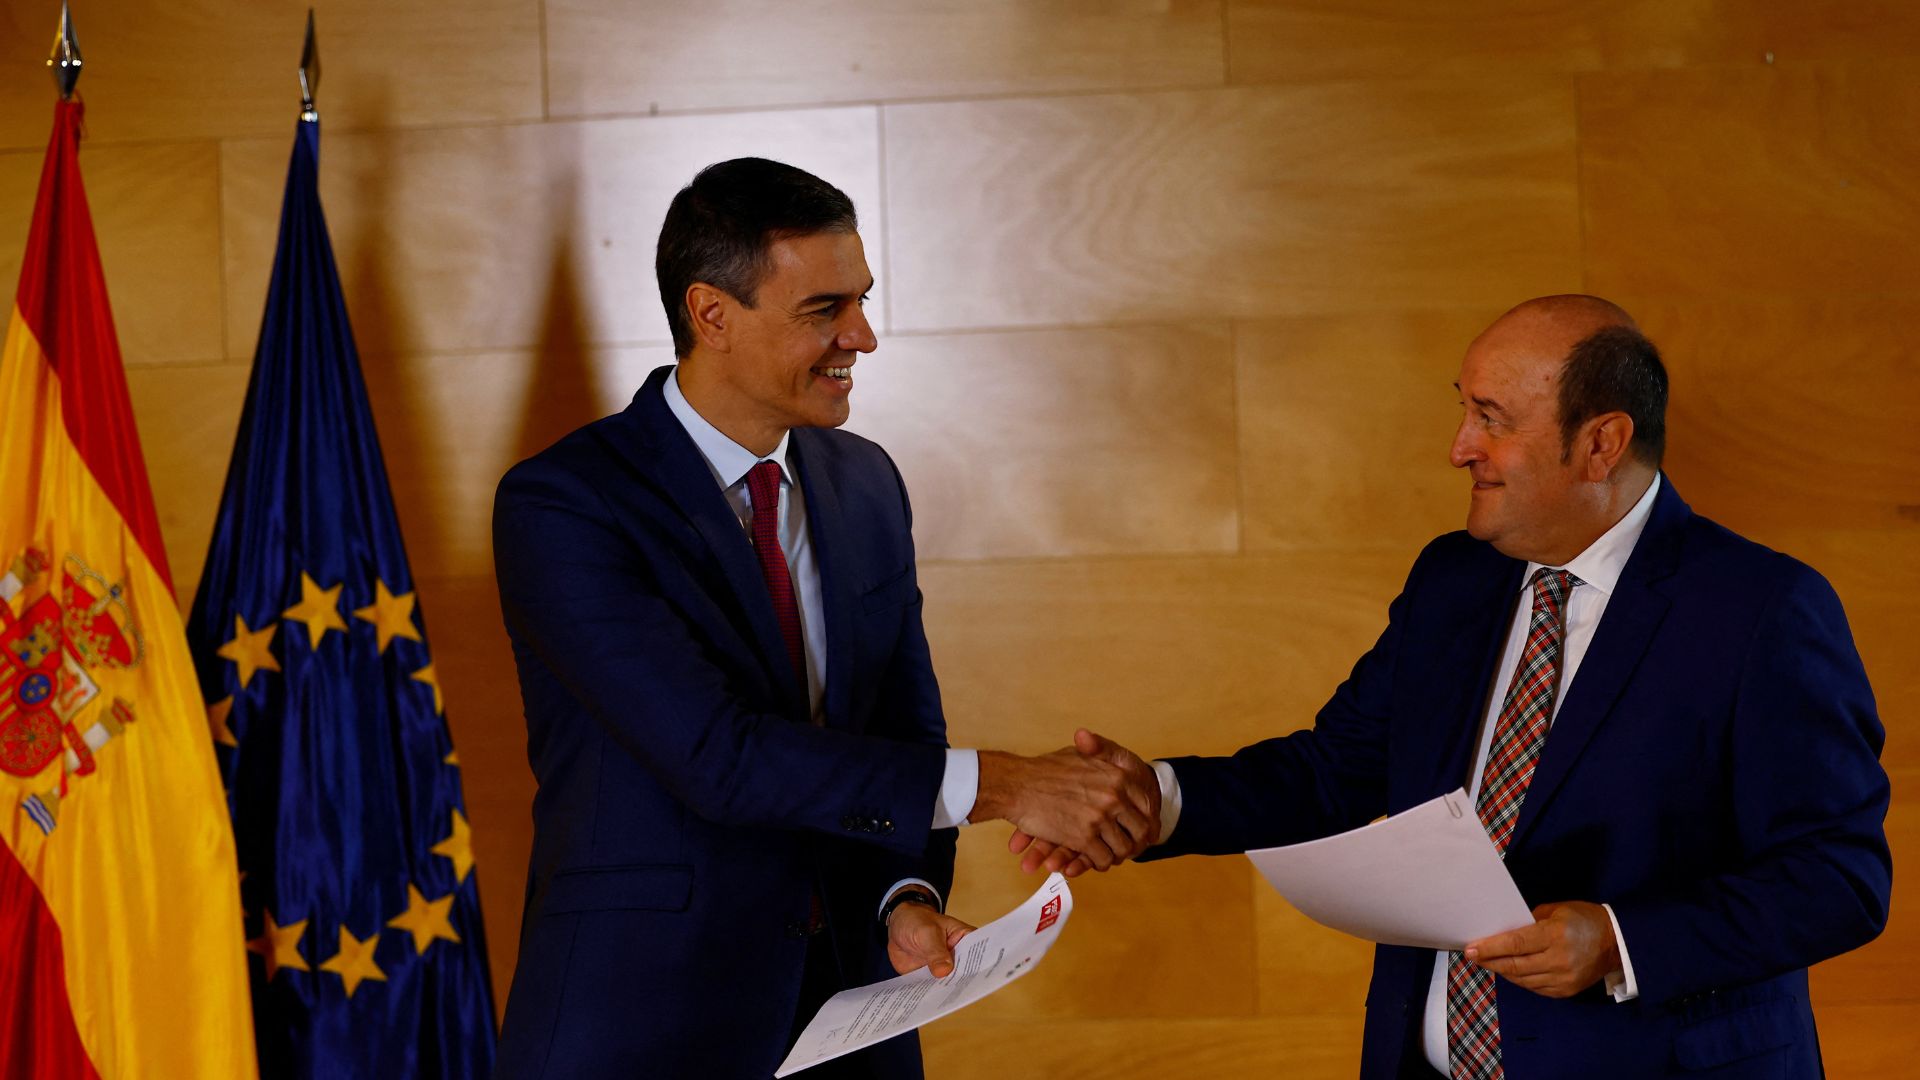 Sanchez shakes hands with Andoni Ortuzar, president of the Basque Nationalist Party (PNV) after signing an agreement that will support Sanchez's bid to clinch another term in office. /Susana Vera/Reuters